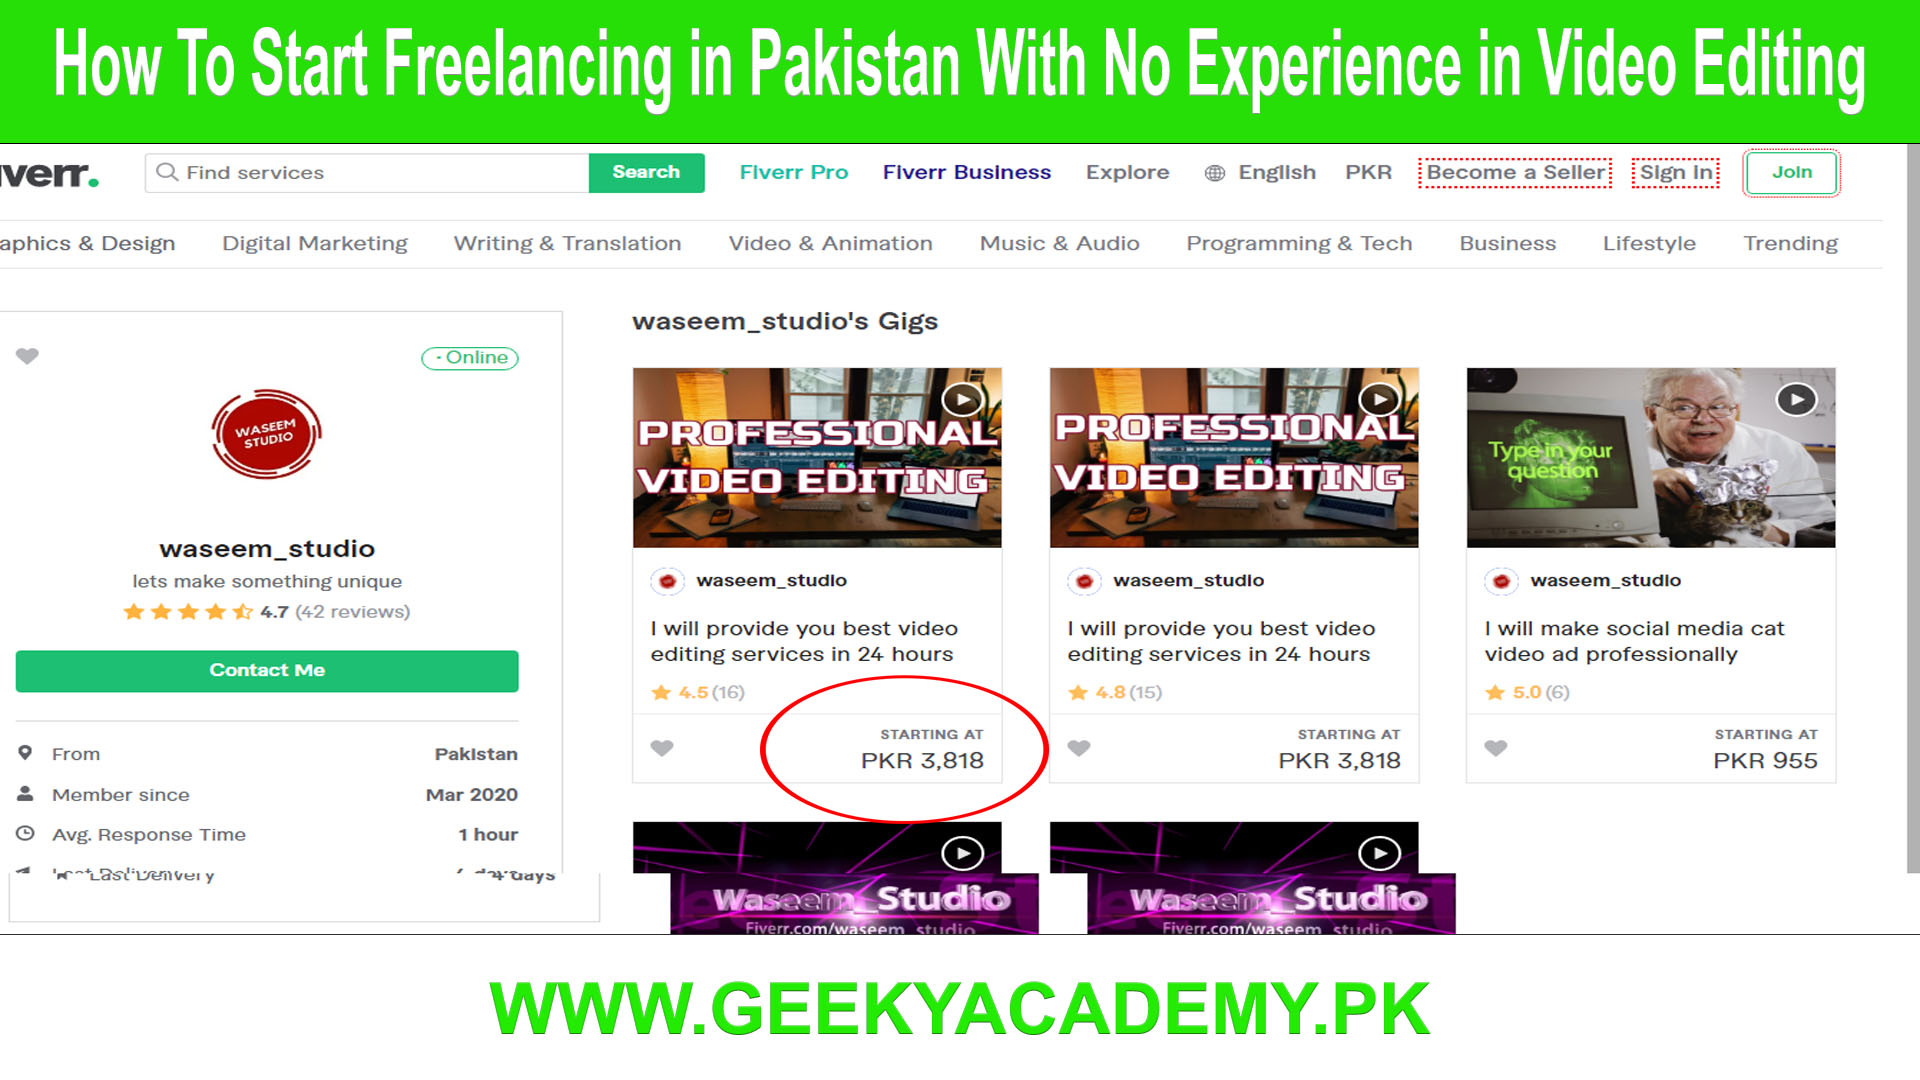 How To Start Freelancing in Pakistan With No Experience in Video Editing, Freelancing in Pakistan